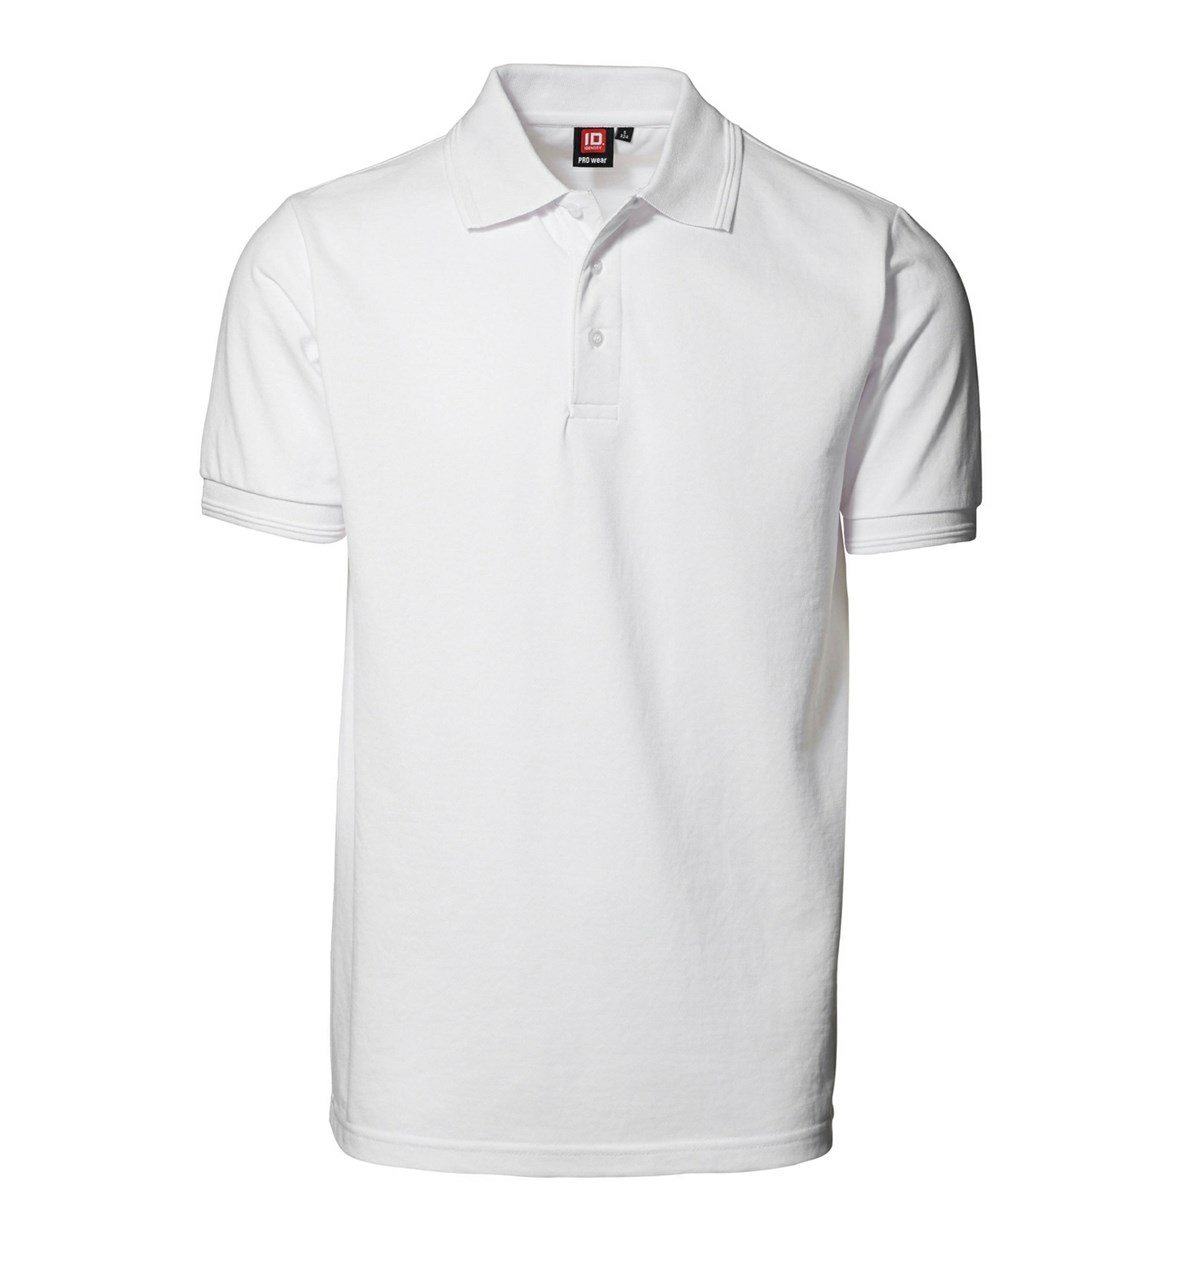 Picture of Pro Wear Poloshirt without pocket